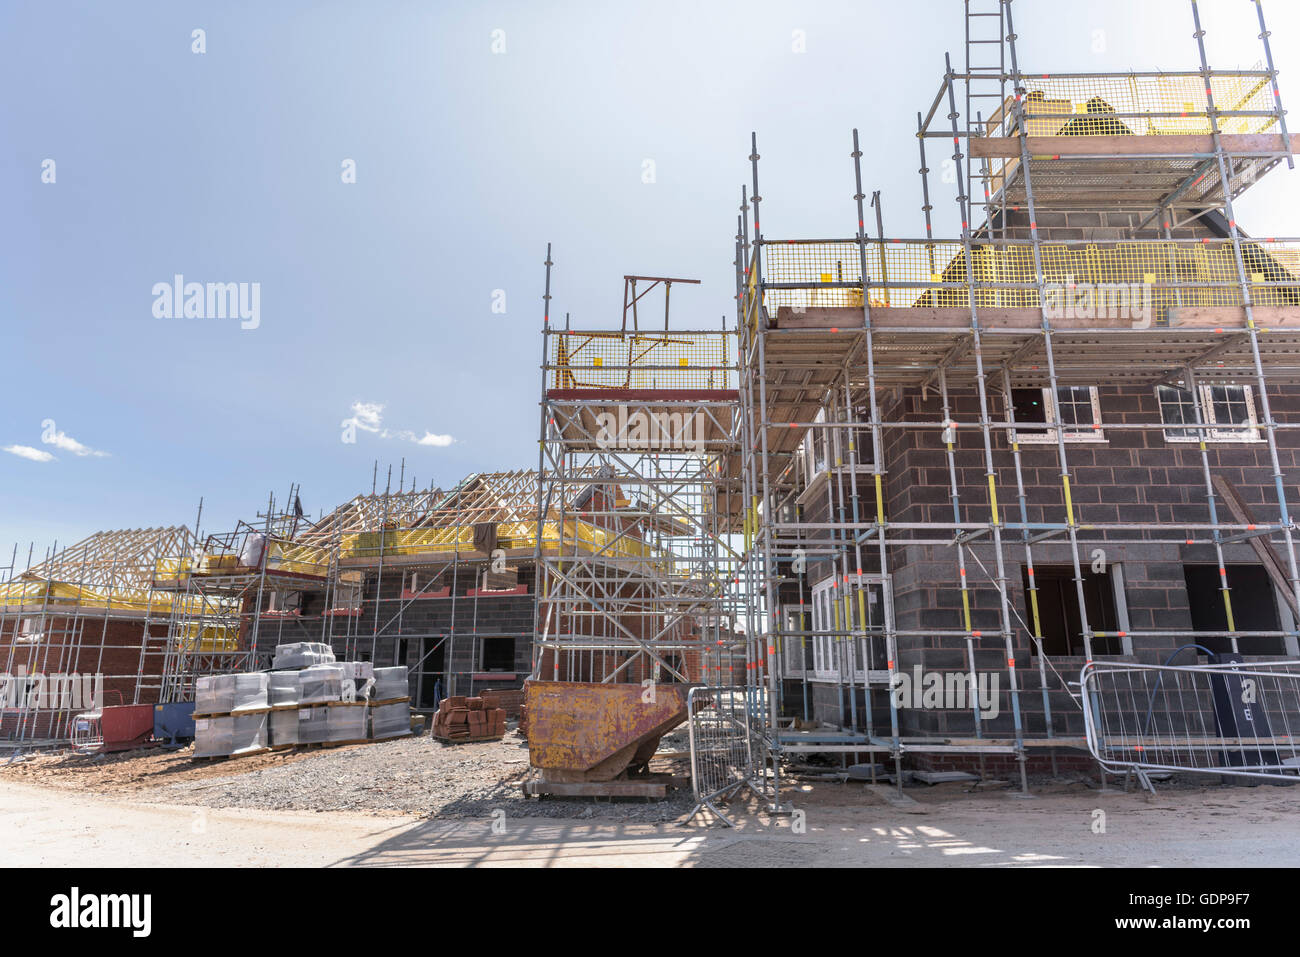 View of housing development on building site Stock Photo